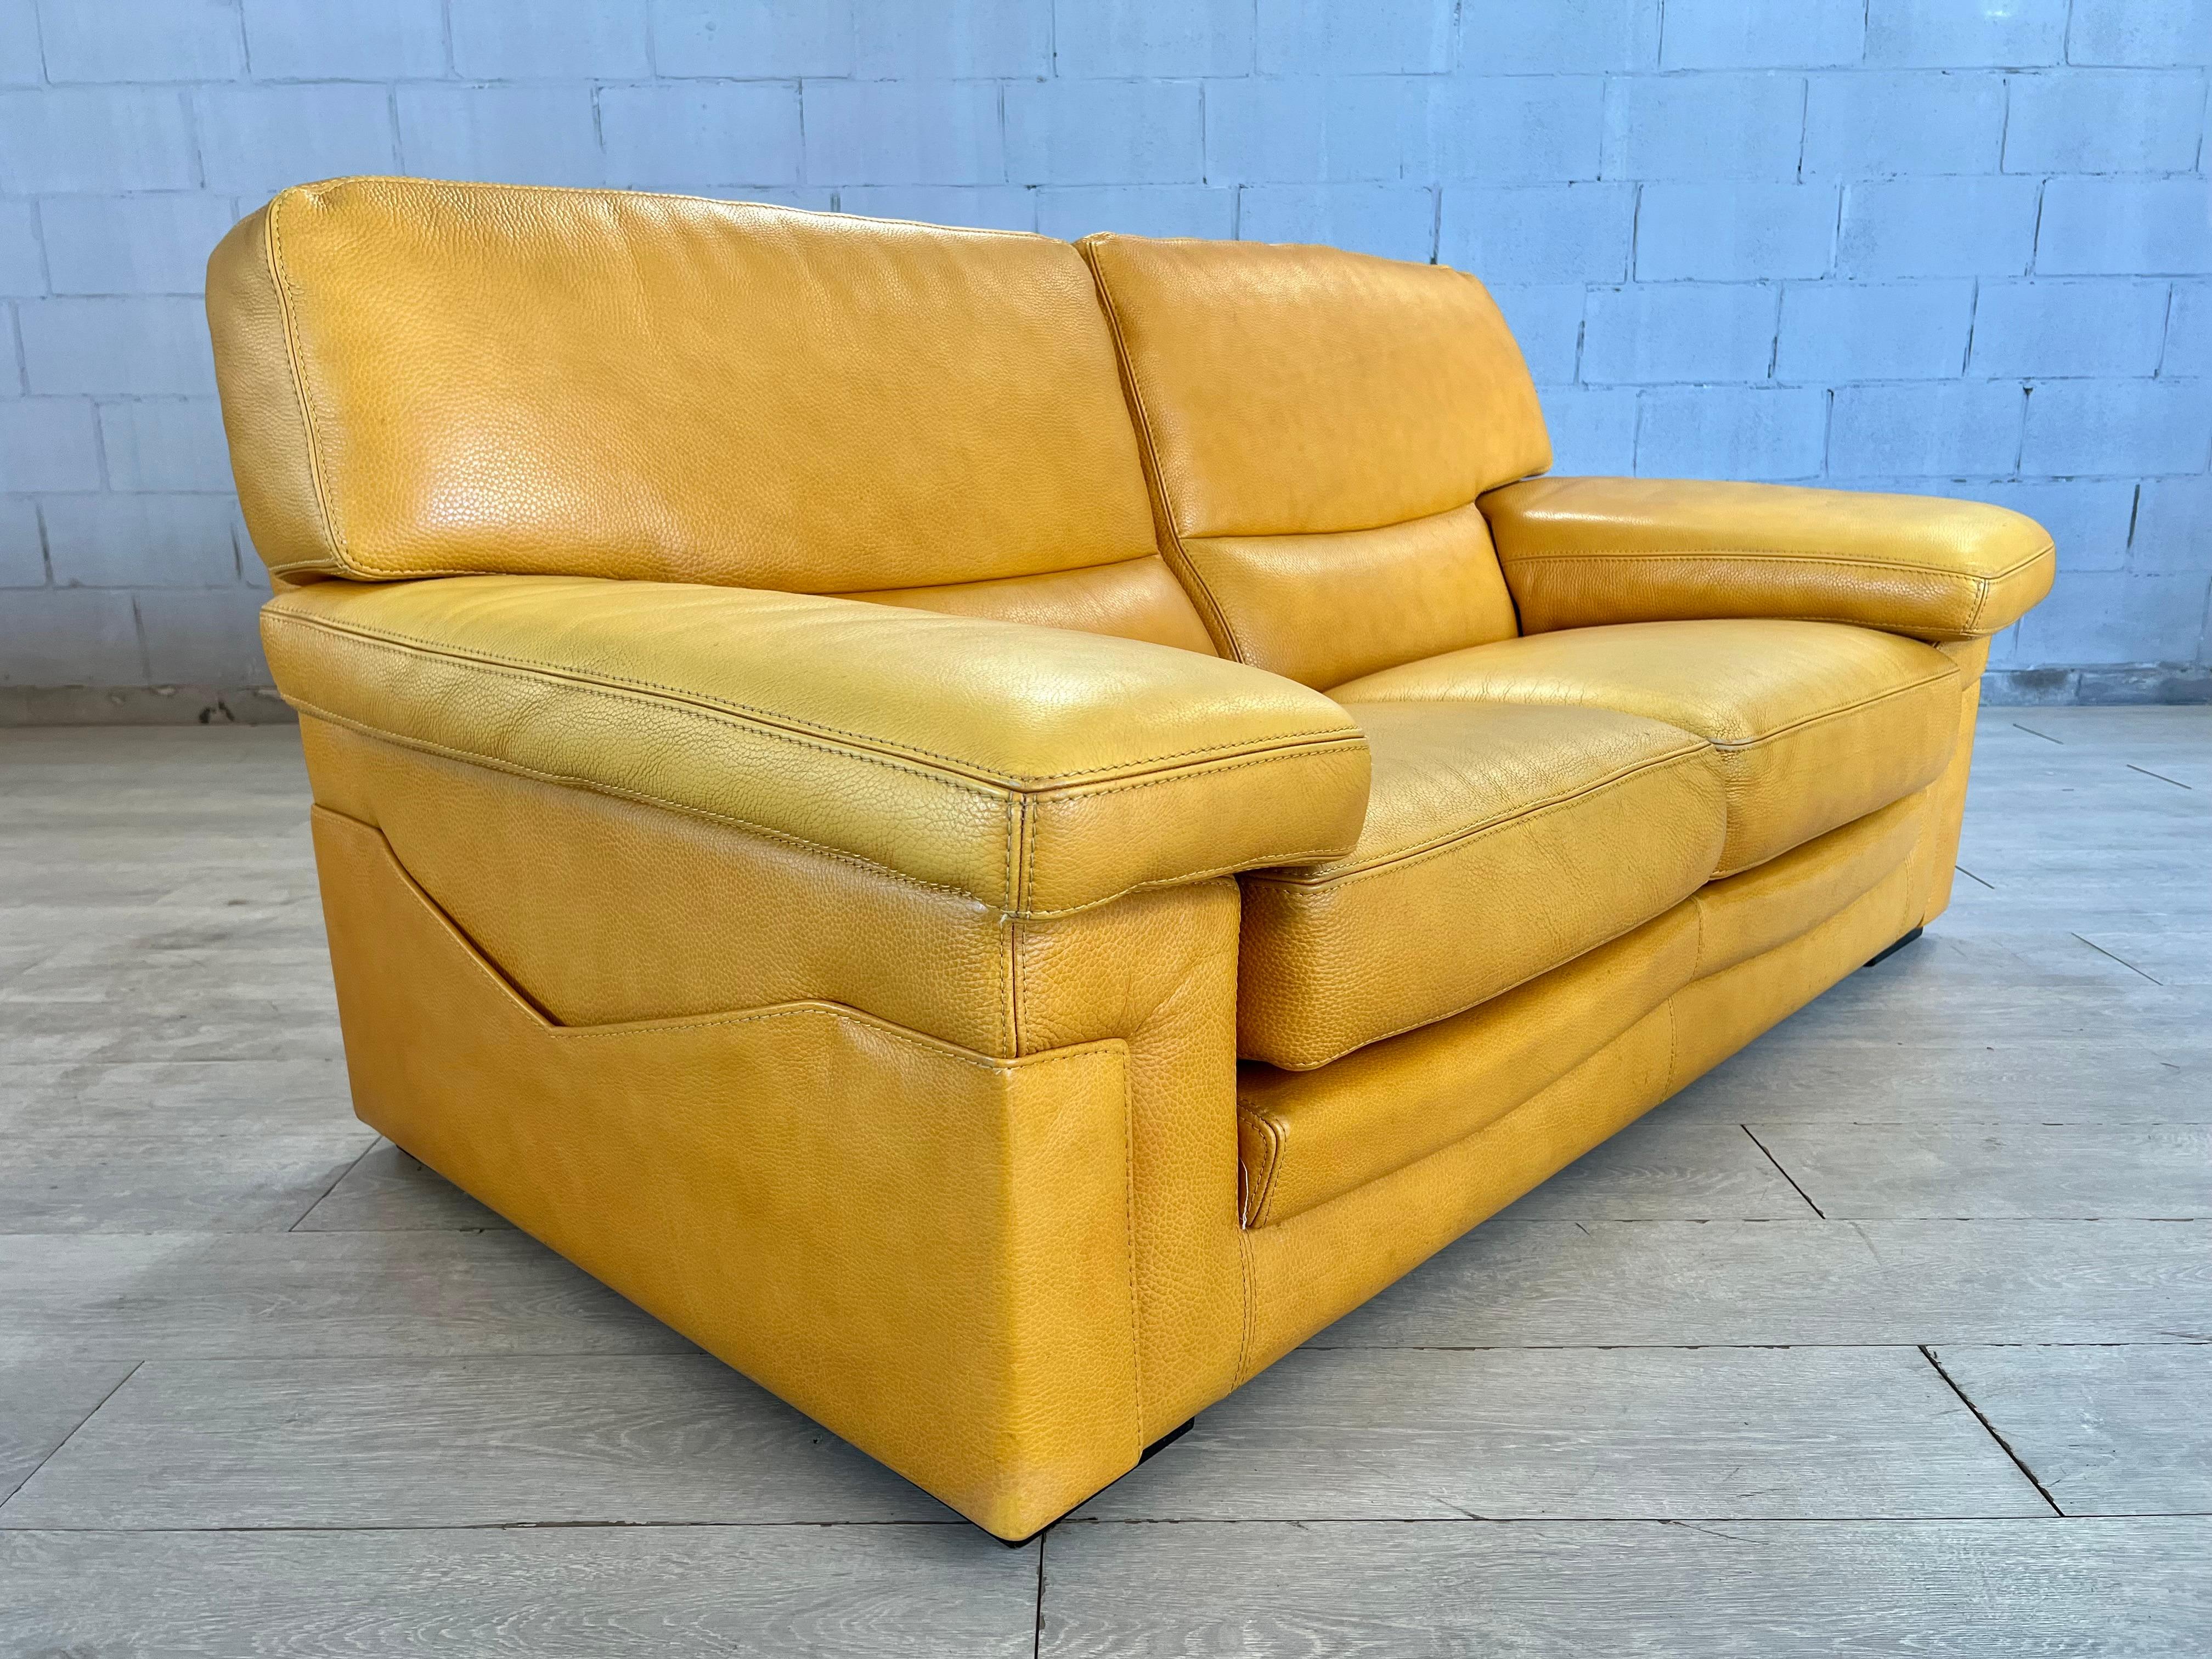 Late 20th Century Original Vintage Modern Yellow Leather Sofa Lounger by Roche Bobois, Stamped